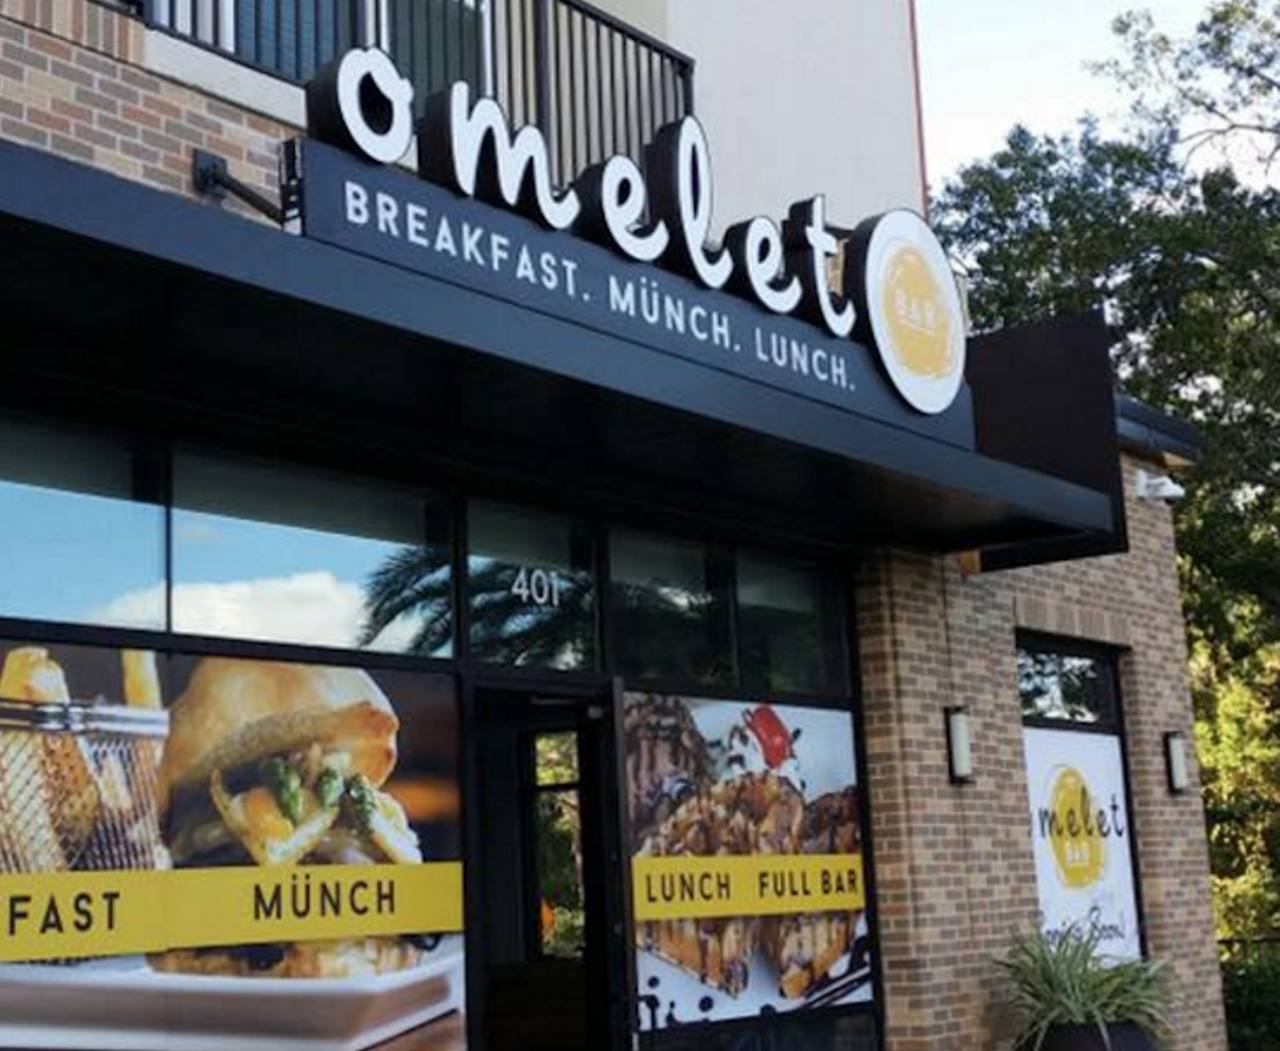 Omelet Bar
When: Open now
Where: 11250 Strategy Blvd., 407-704-1597
Founded by University of Central Florida alum Tarek Kanso, this breakfast joint near the UCF campus allows patrons to build their own omelets, frittatas, waffles and pancakes, or pick from a sizable selection of faves. A &#147;flight&#148; of chicken & waffles has got to be a first. If brekkie ain&#146;t your thing, lunch items like burgers, salads and sandwiches are offered, including a host of smaller-portion dishes called &#147;munchkins.&#148;
Photo via Omelet Bar/Facebook